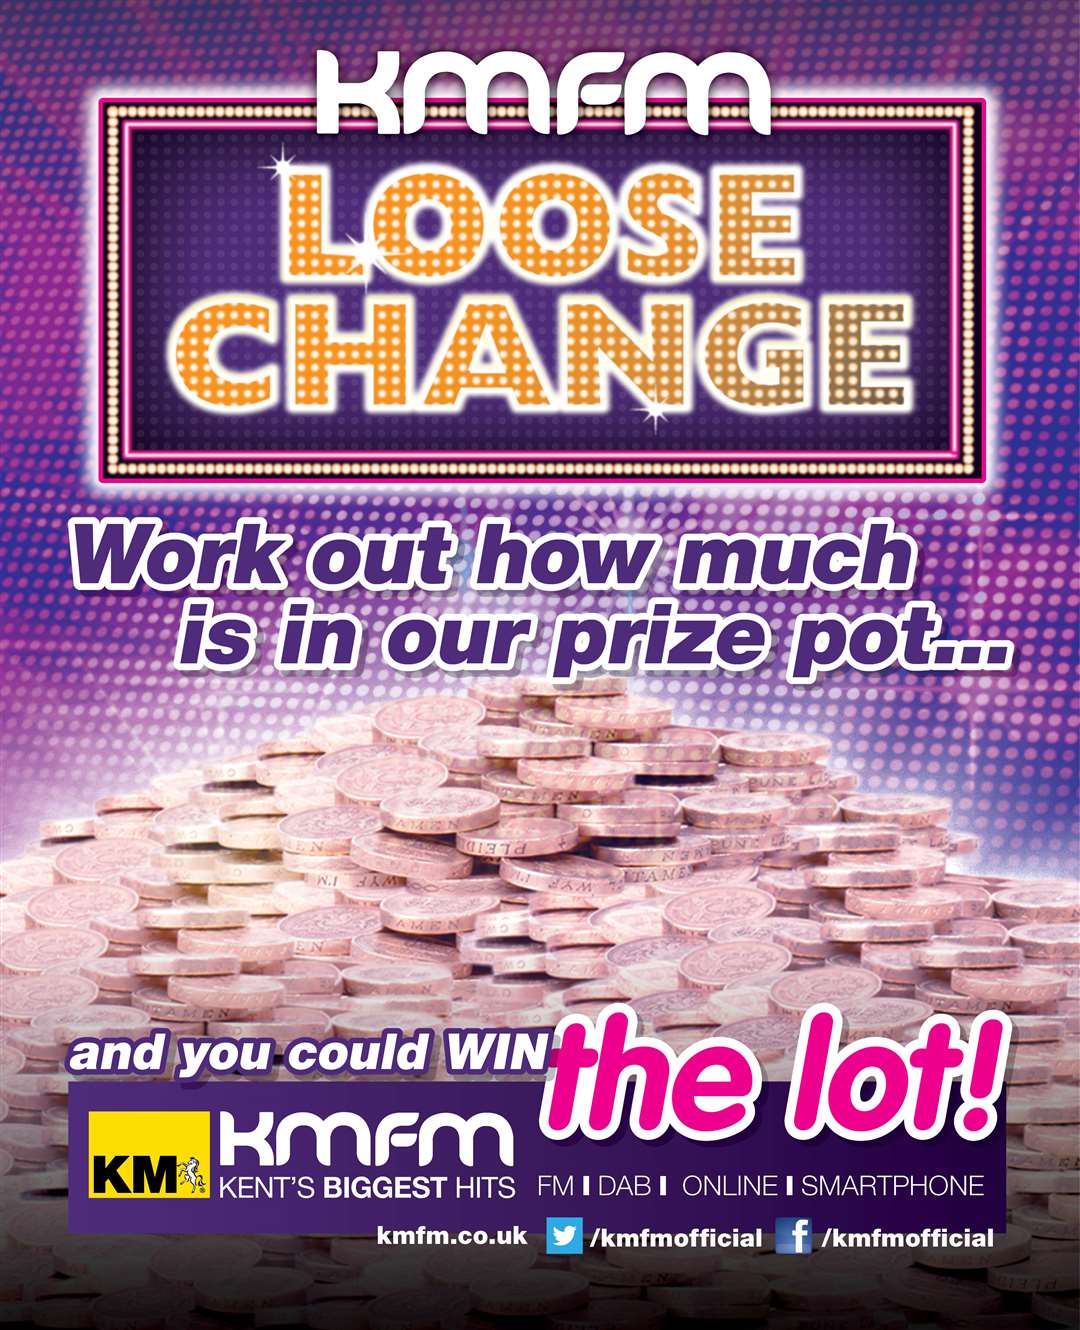 Kmfm's Loose Change competition has been won by Paul Thomson of Deal